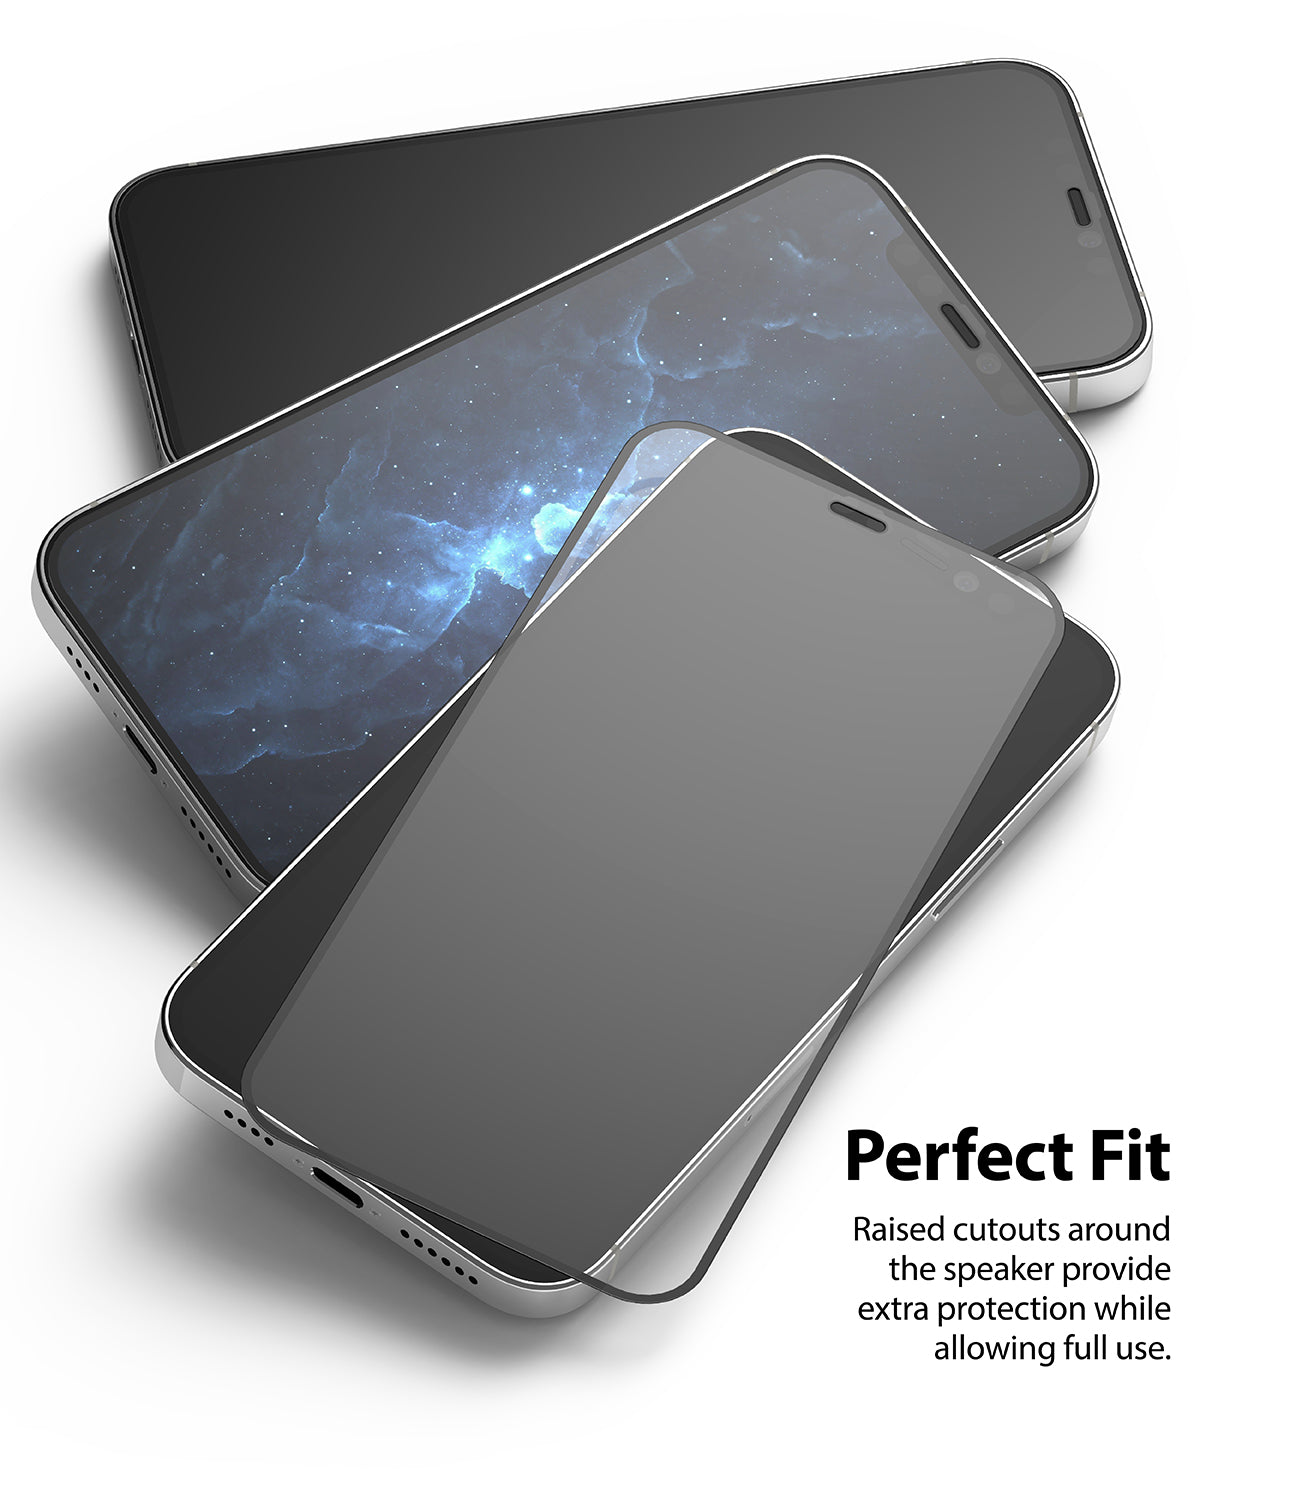 iPhone 12 Pro Max Screen Protector | Invisible Defender Glass - Perfect Fit